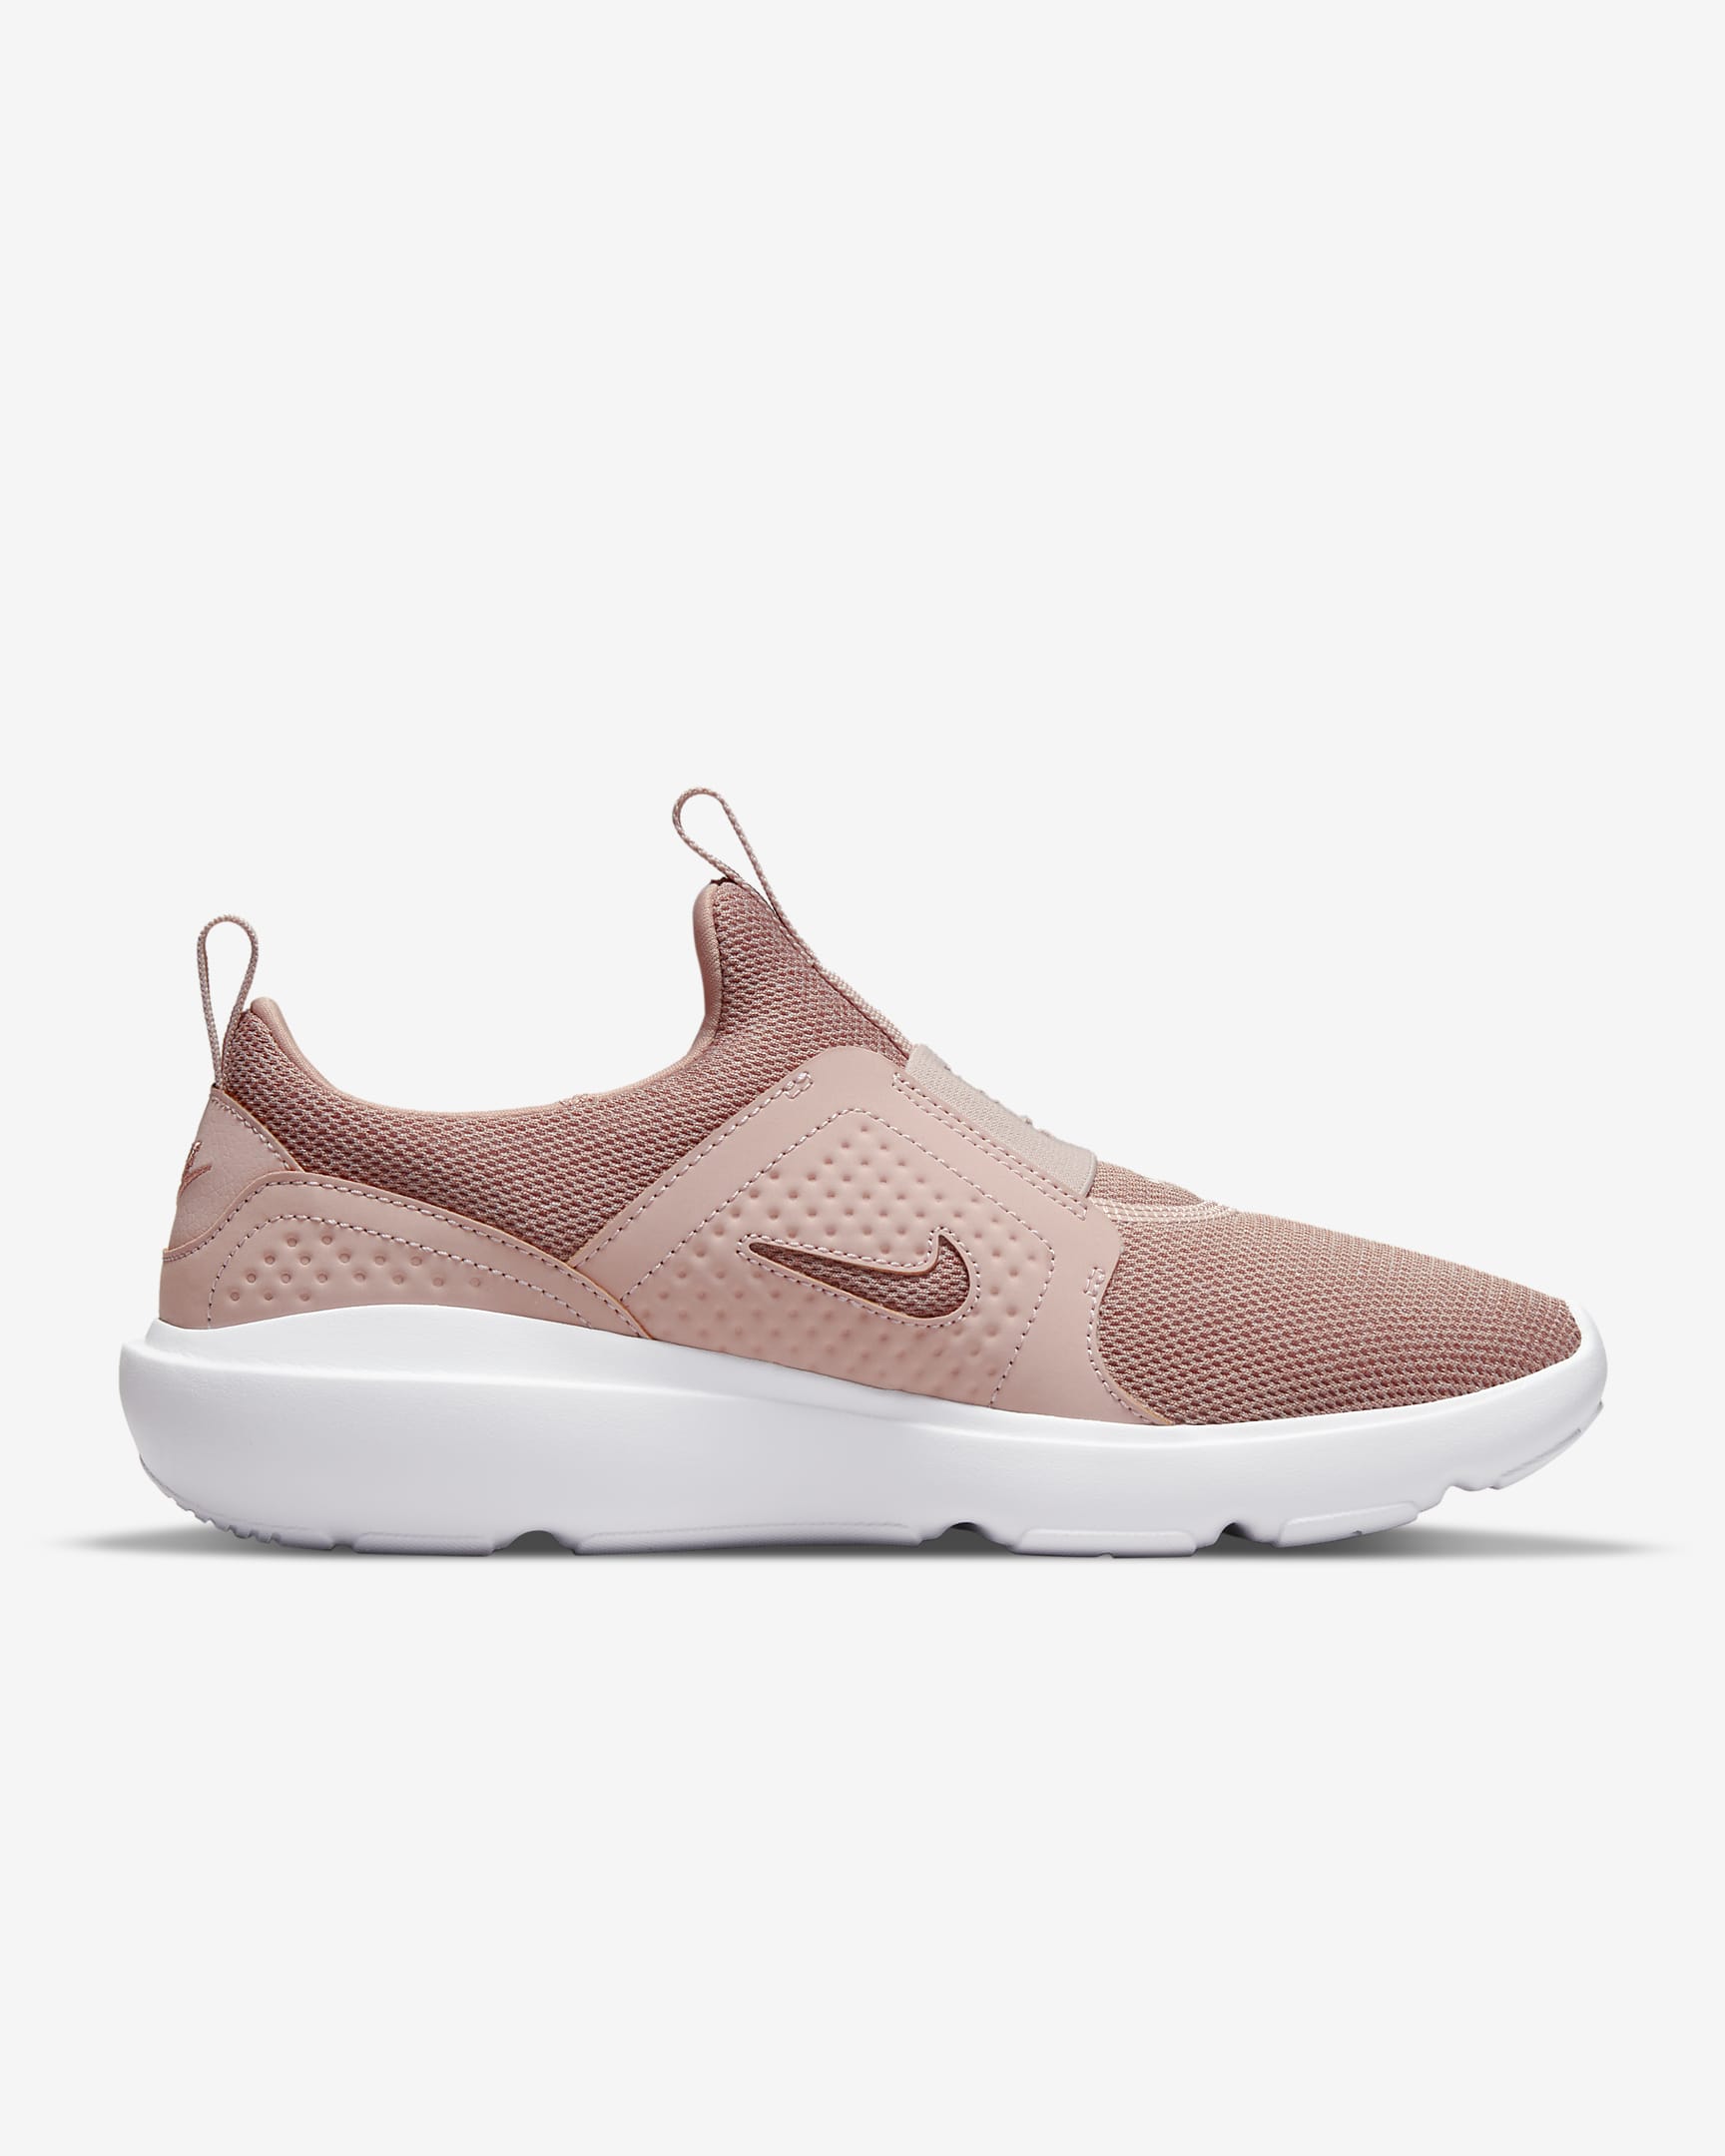 Nike AD Comfort Women's Shoes - Pink Oxford/Rose Whisper/White/Fossil Rose